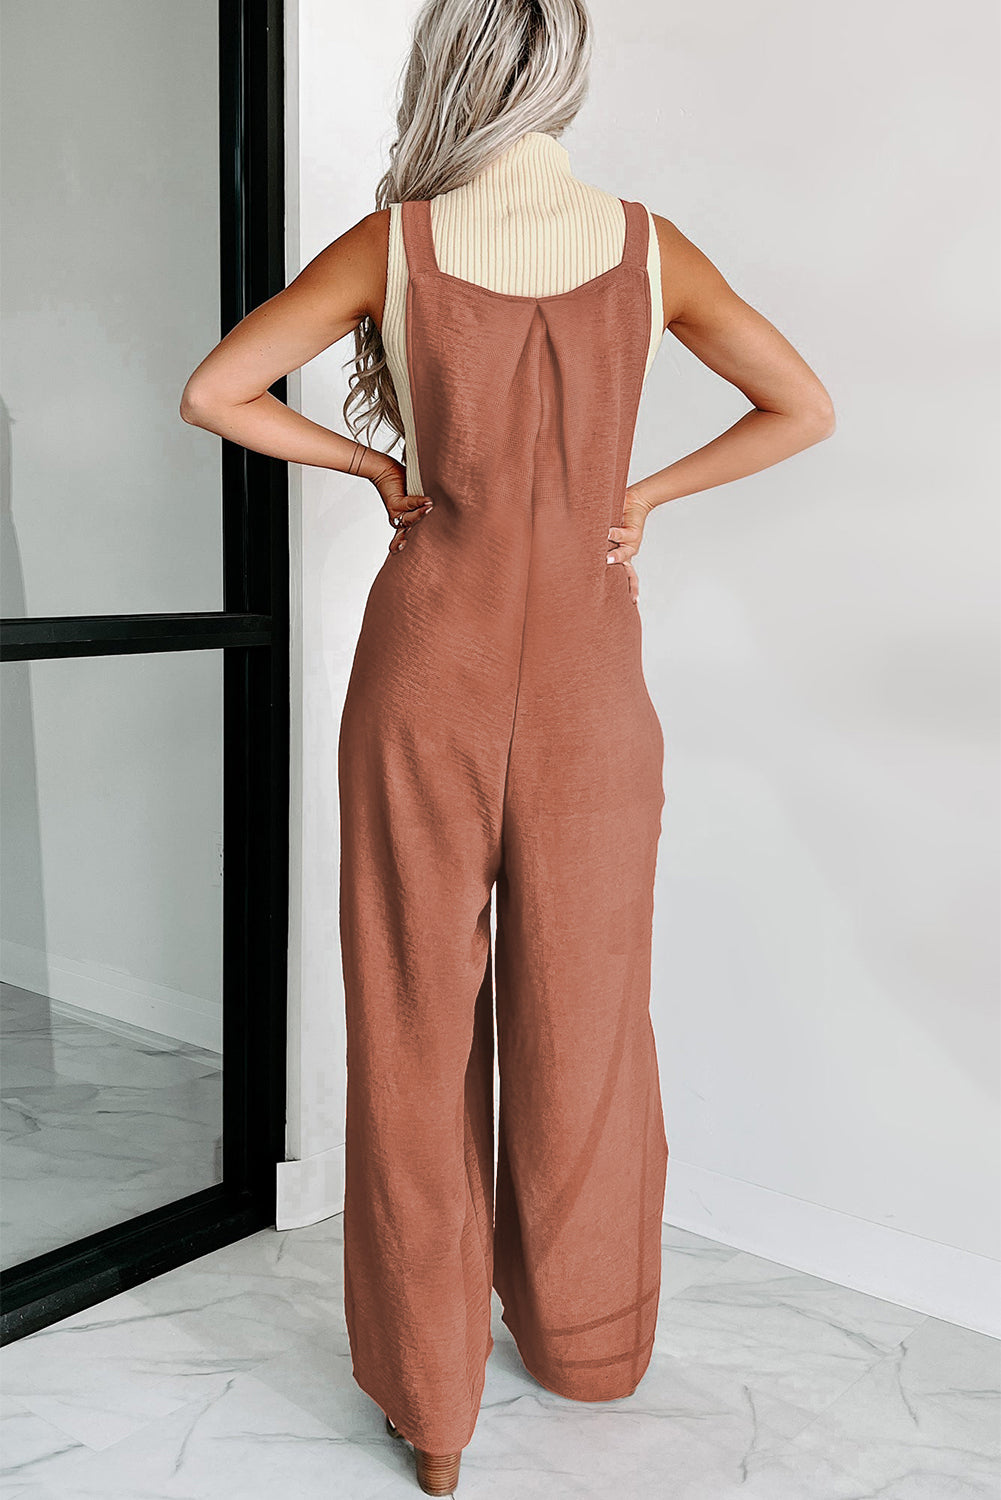 Black Textured Buttoned Straps Ruched Wide Leg Jumpsuit